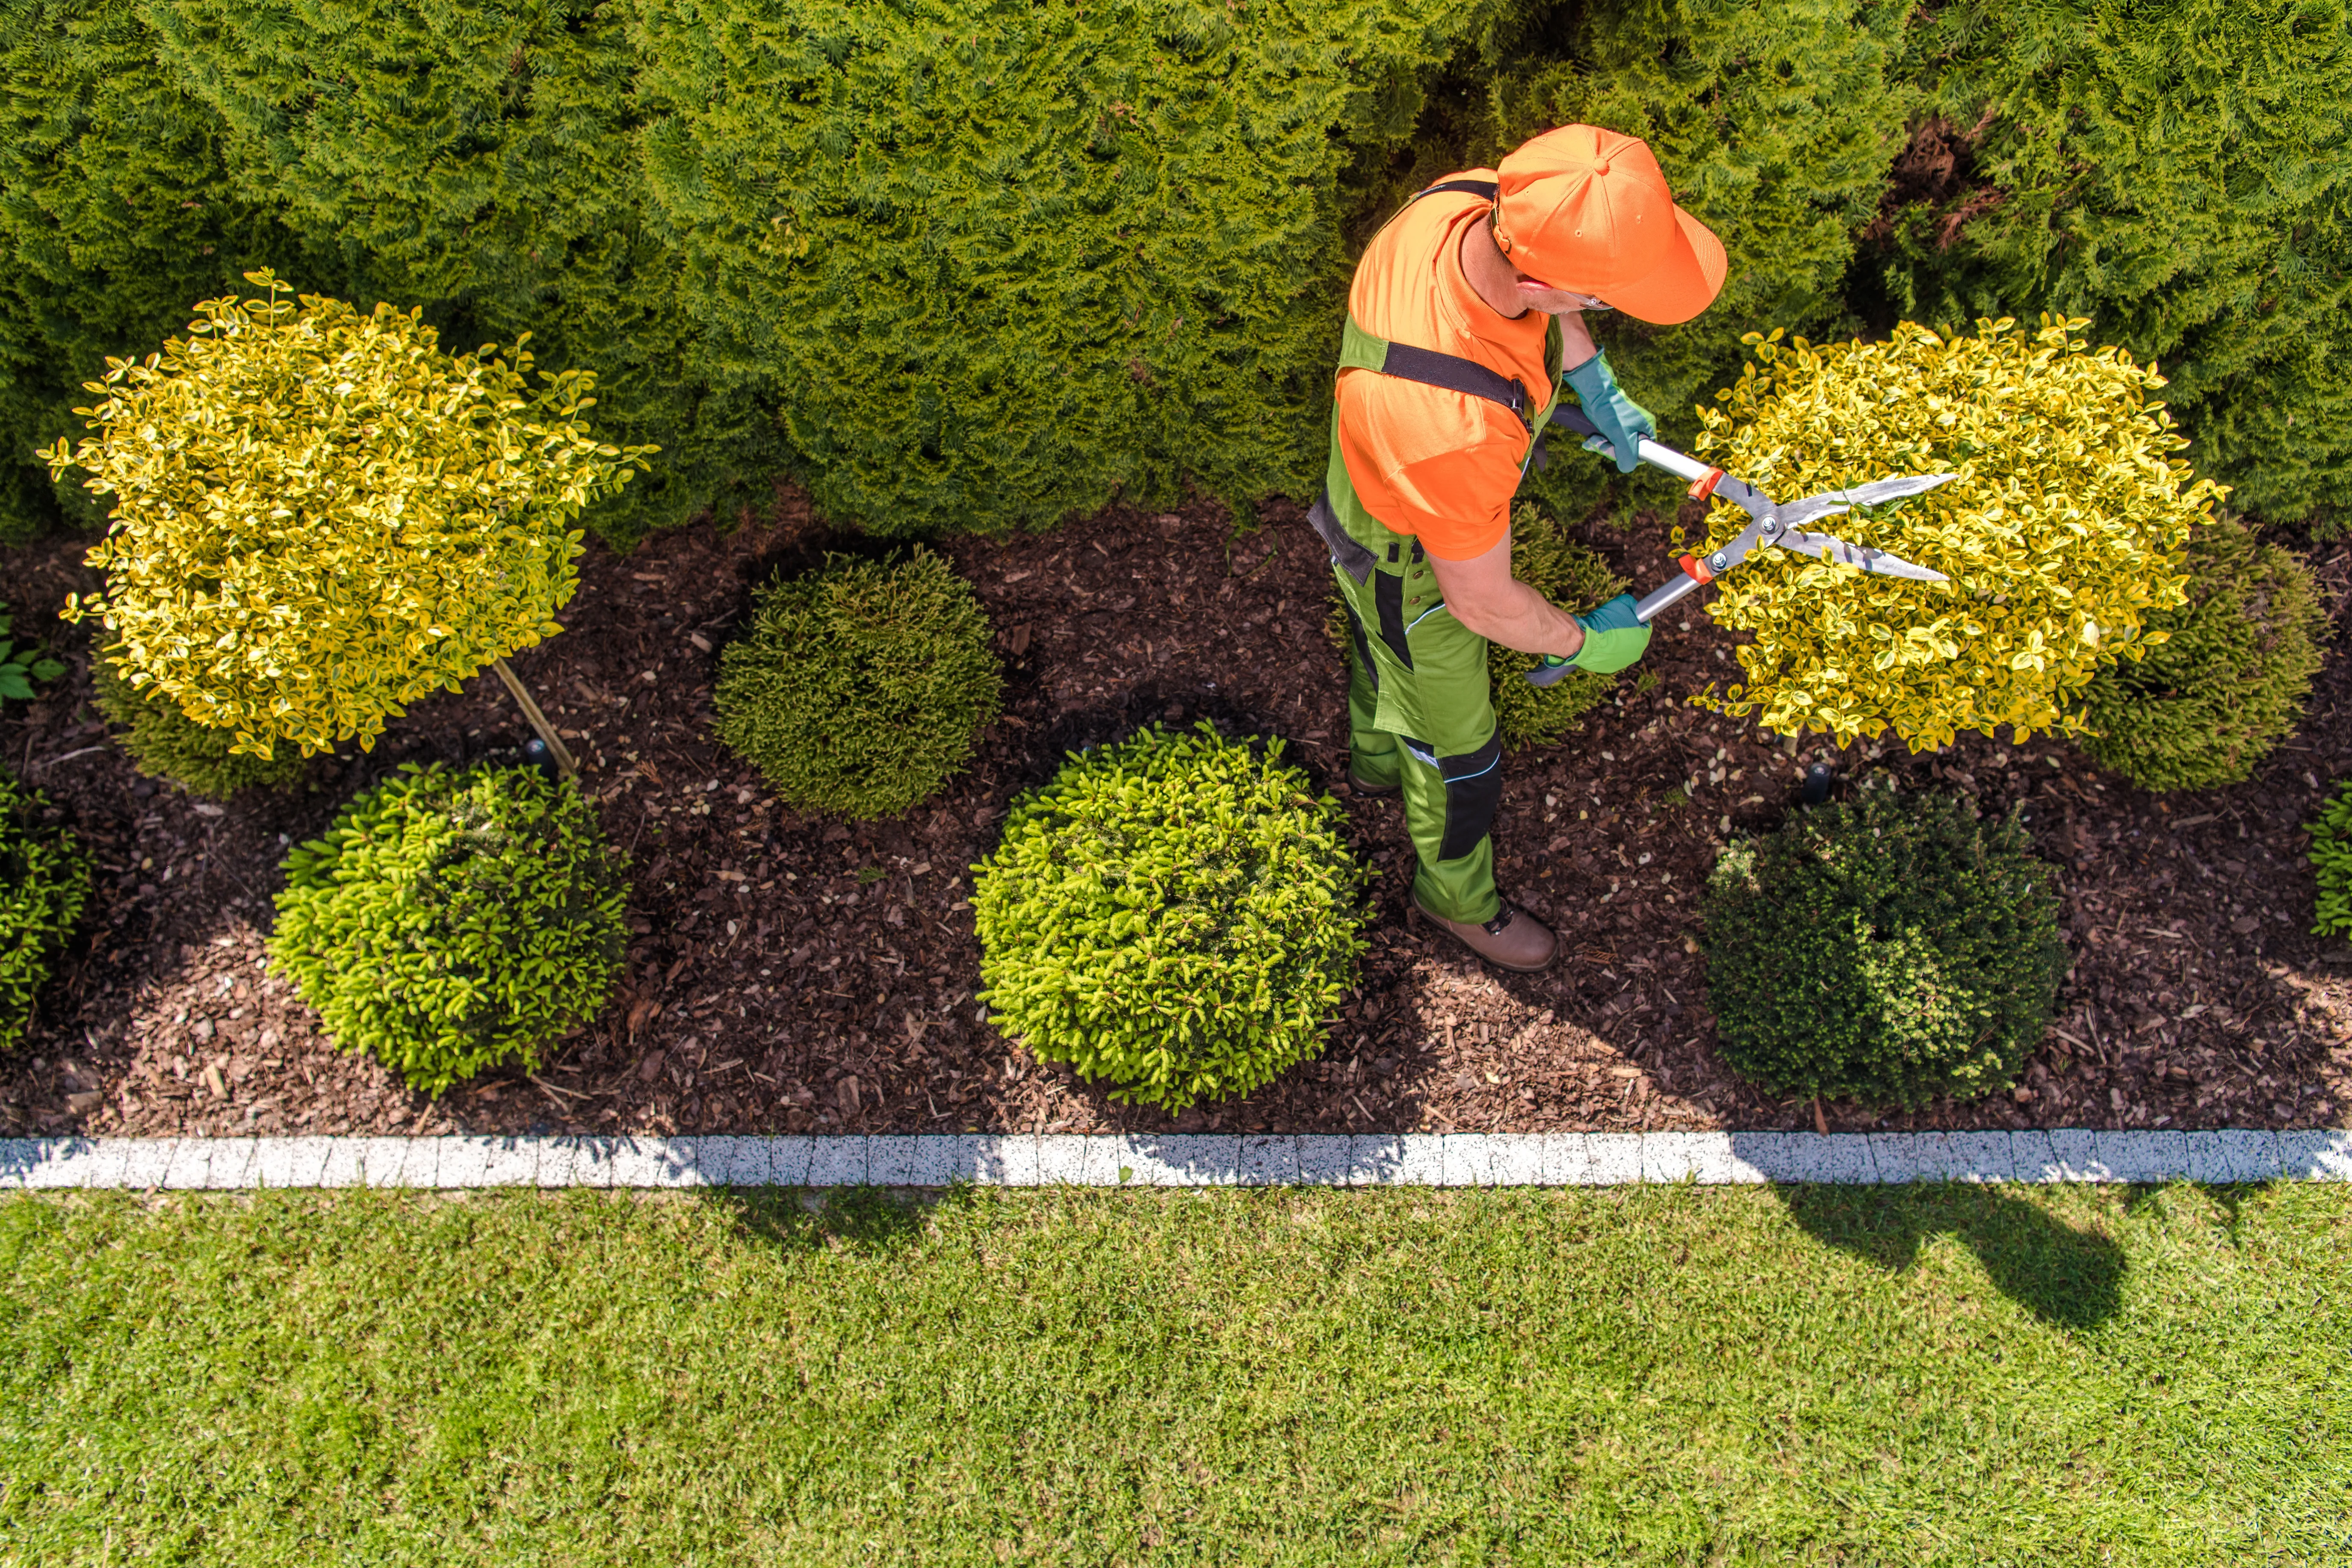 The Cost of Professional Lawn and Landscaping Services